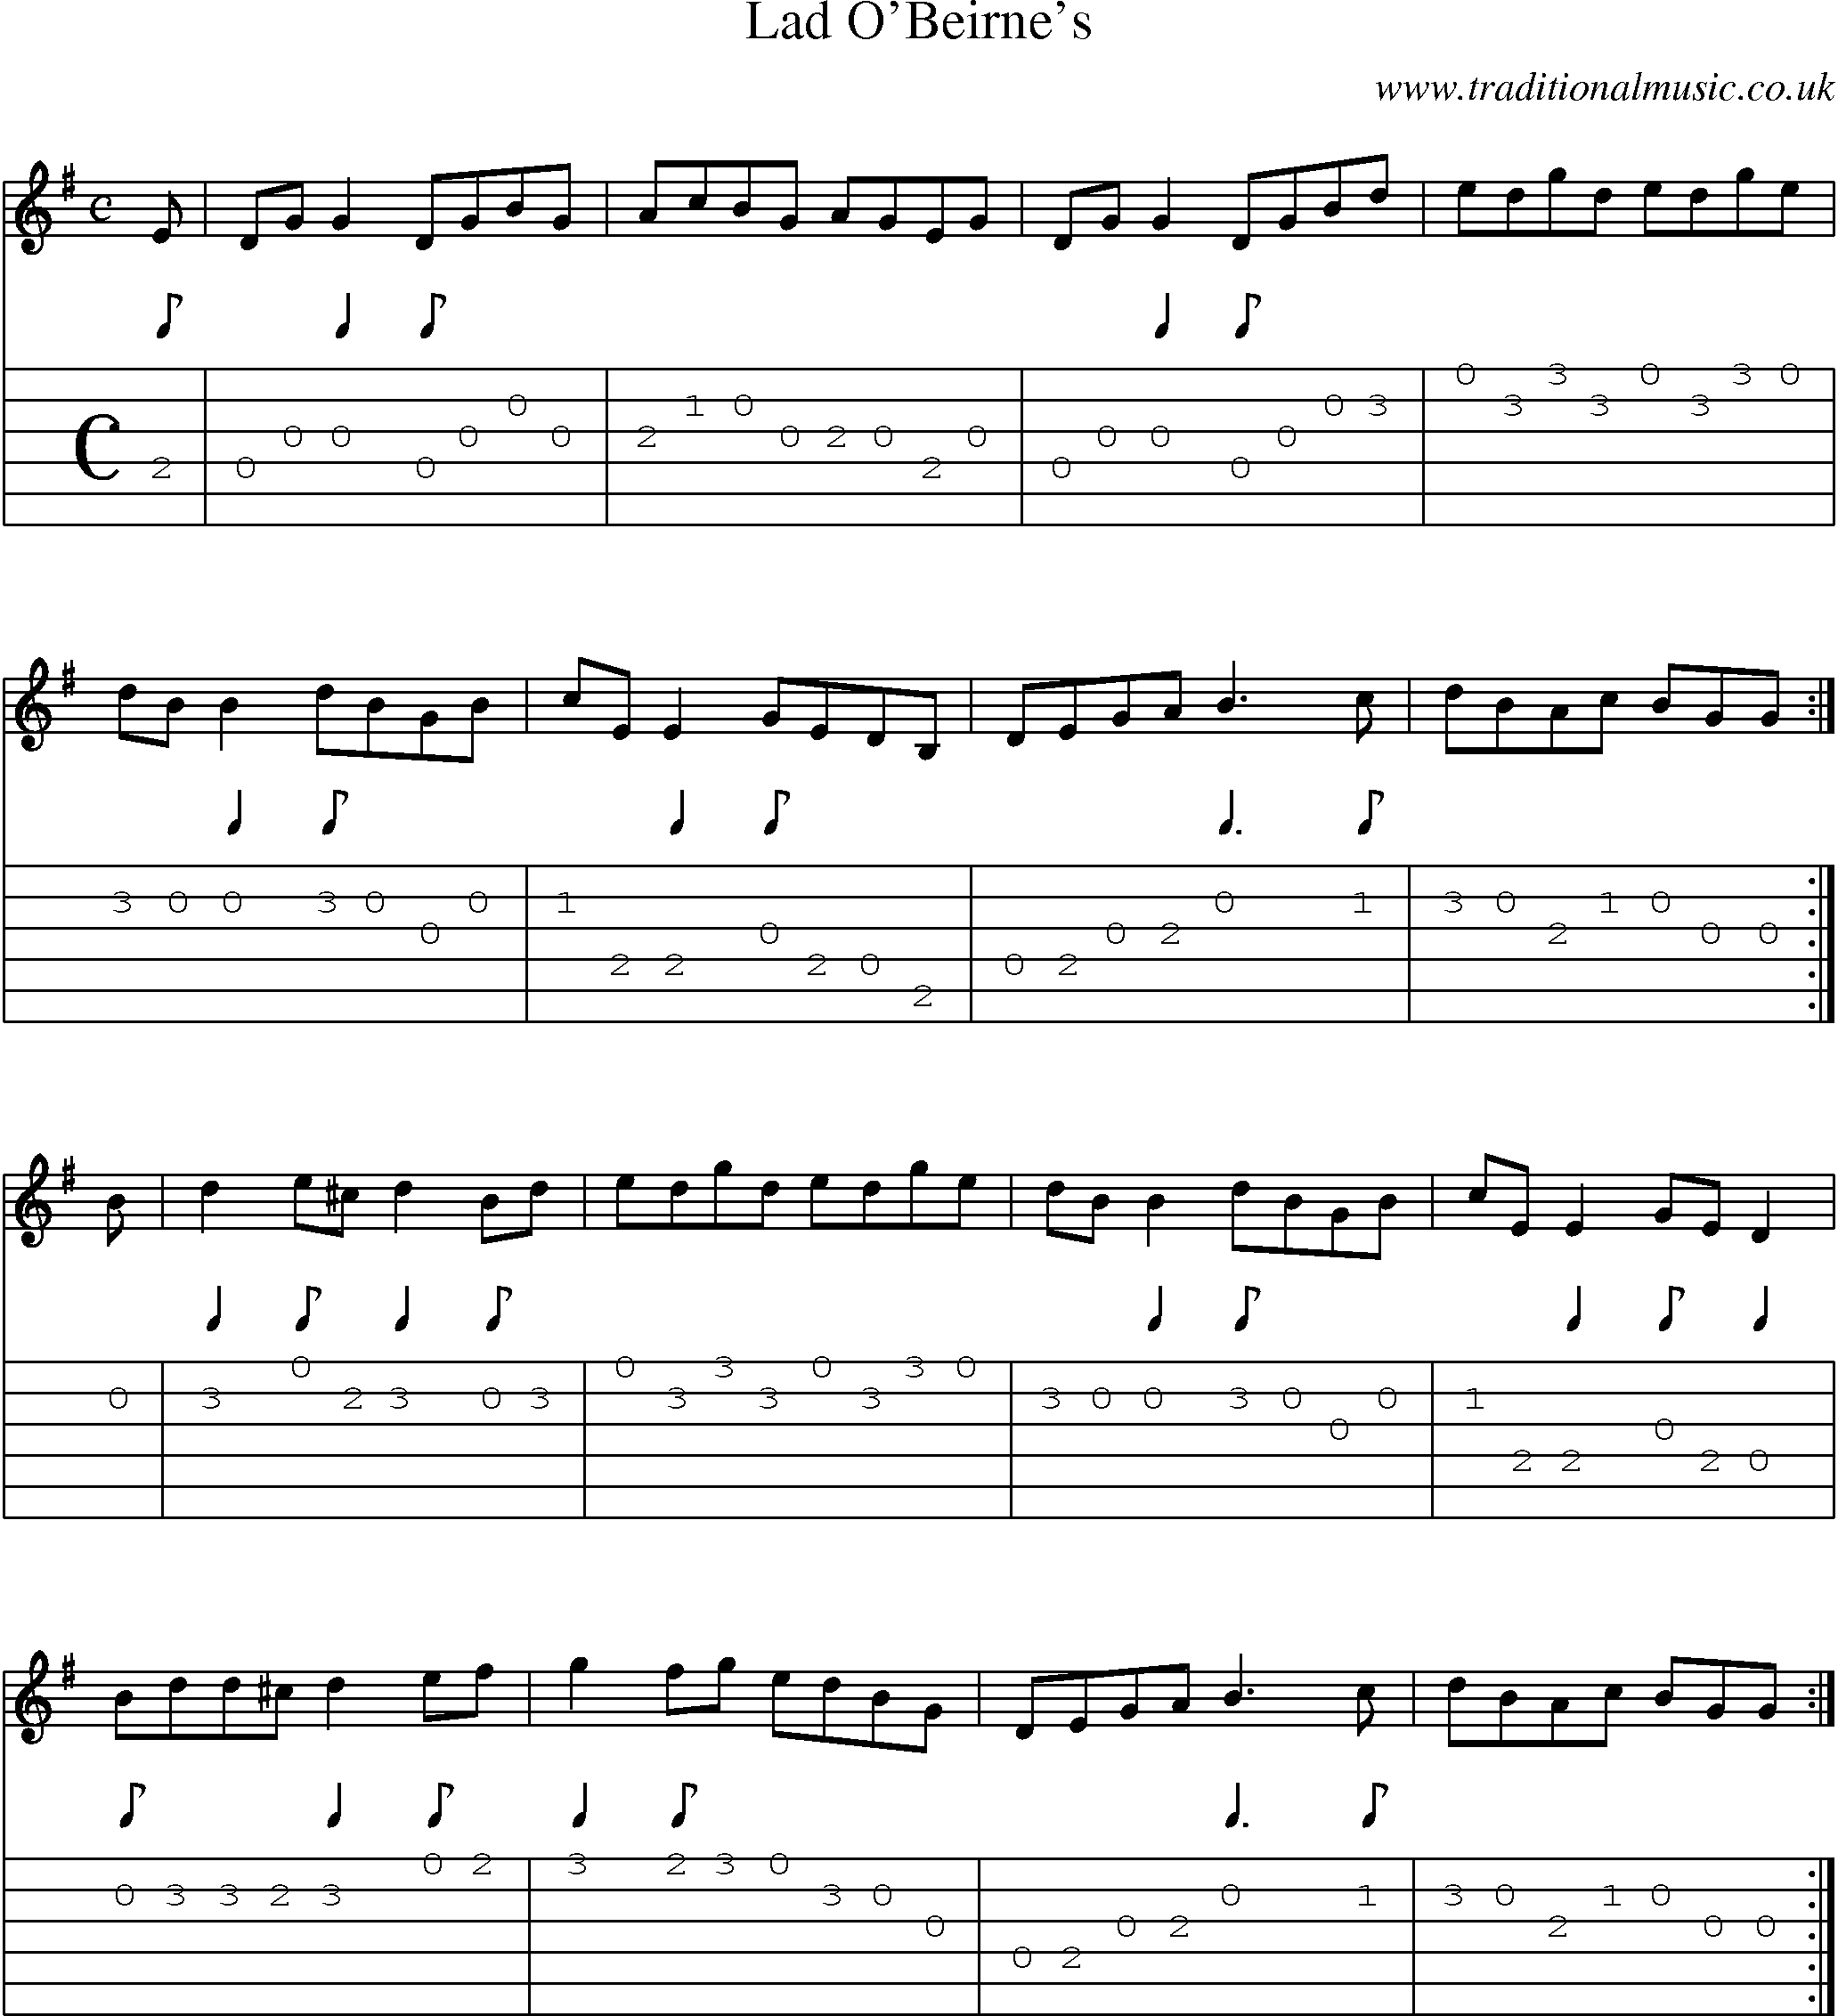 Music Score and Guitar Tabs for Lad Obeirnes